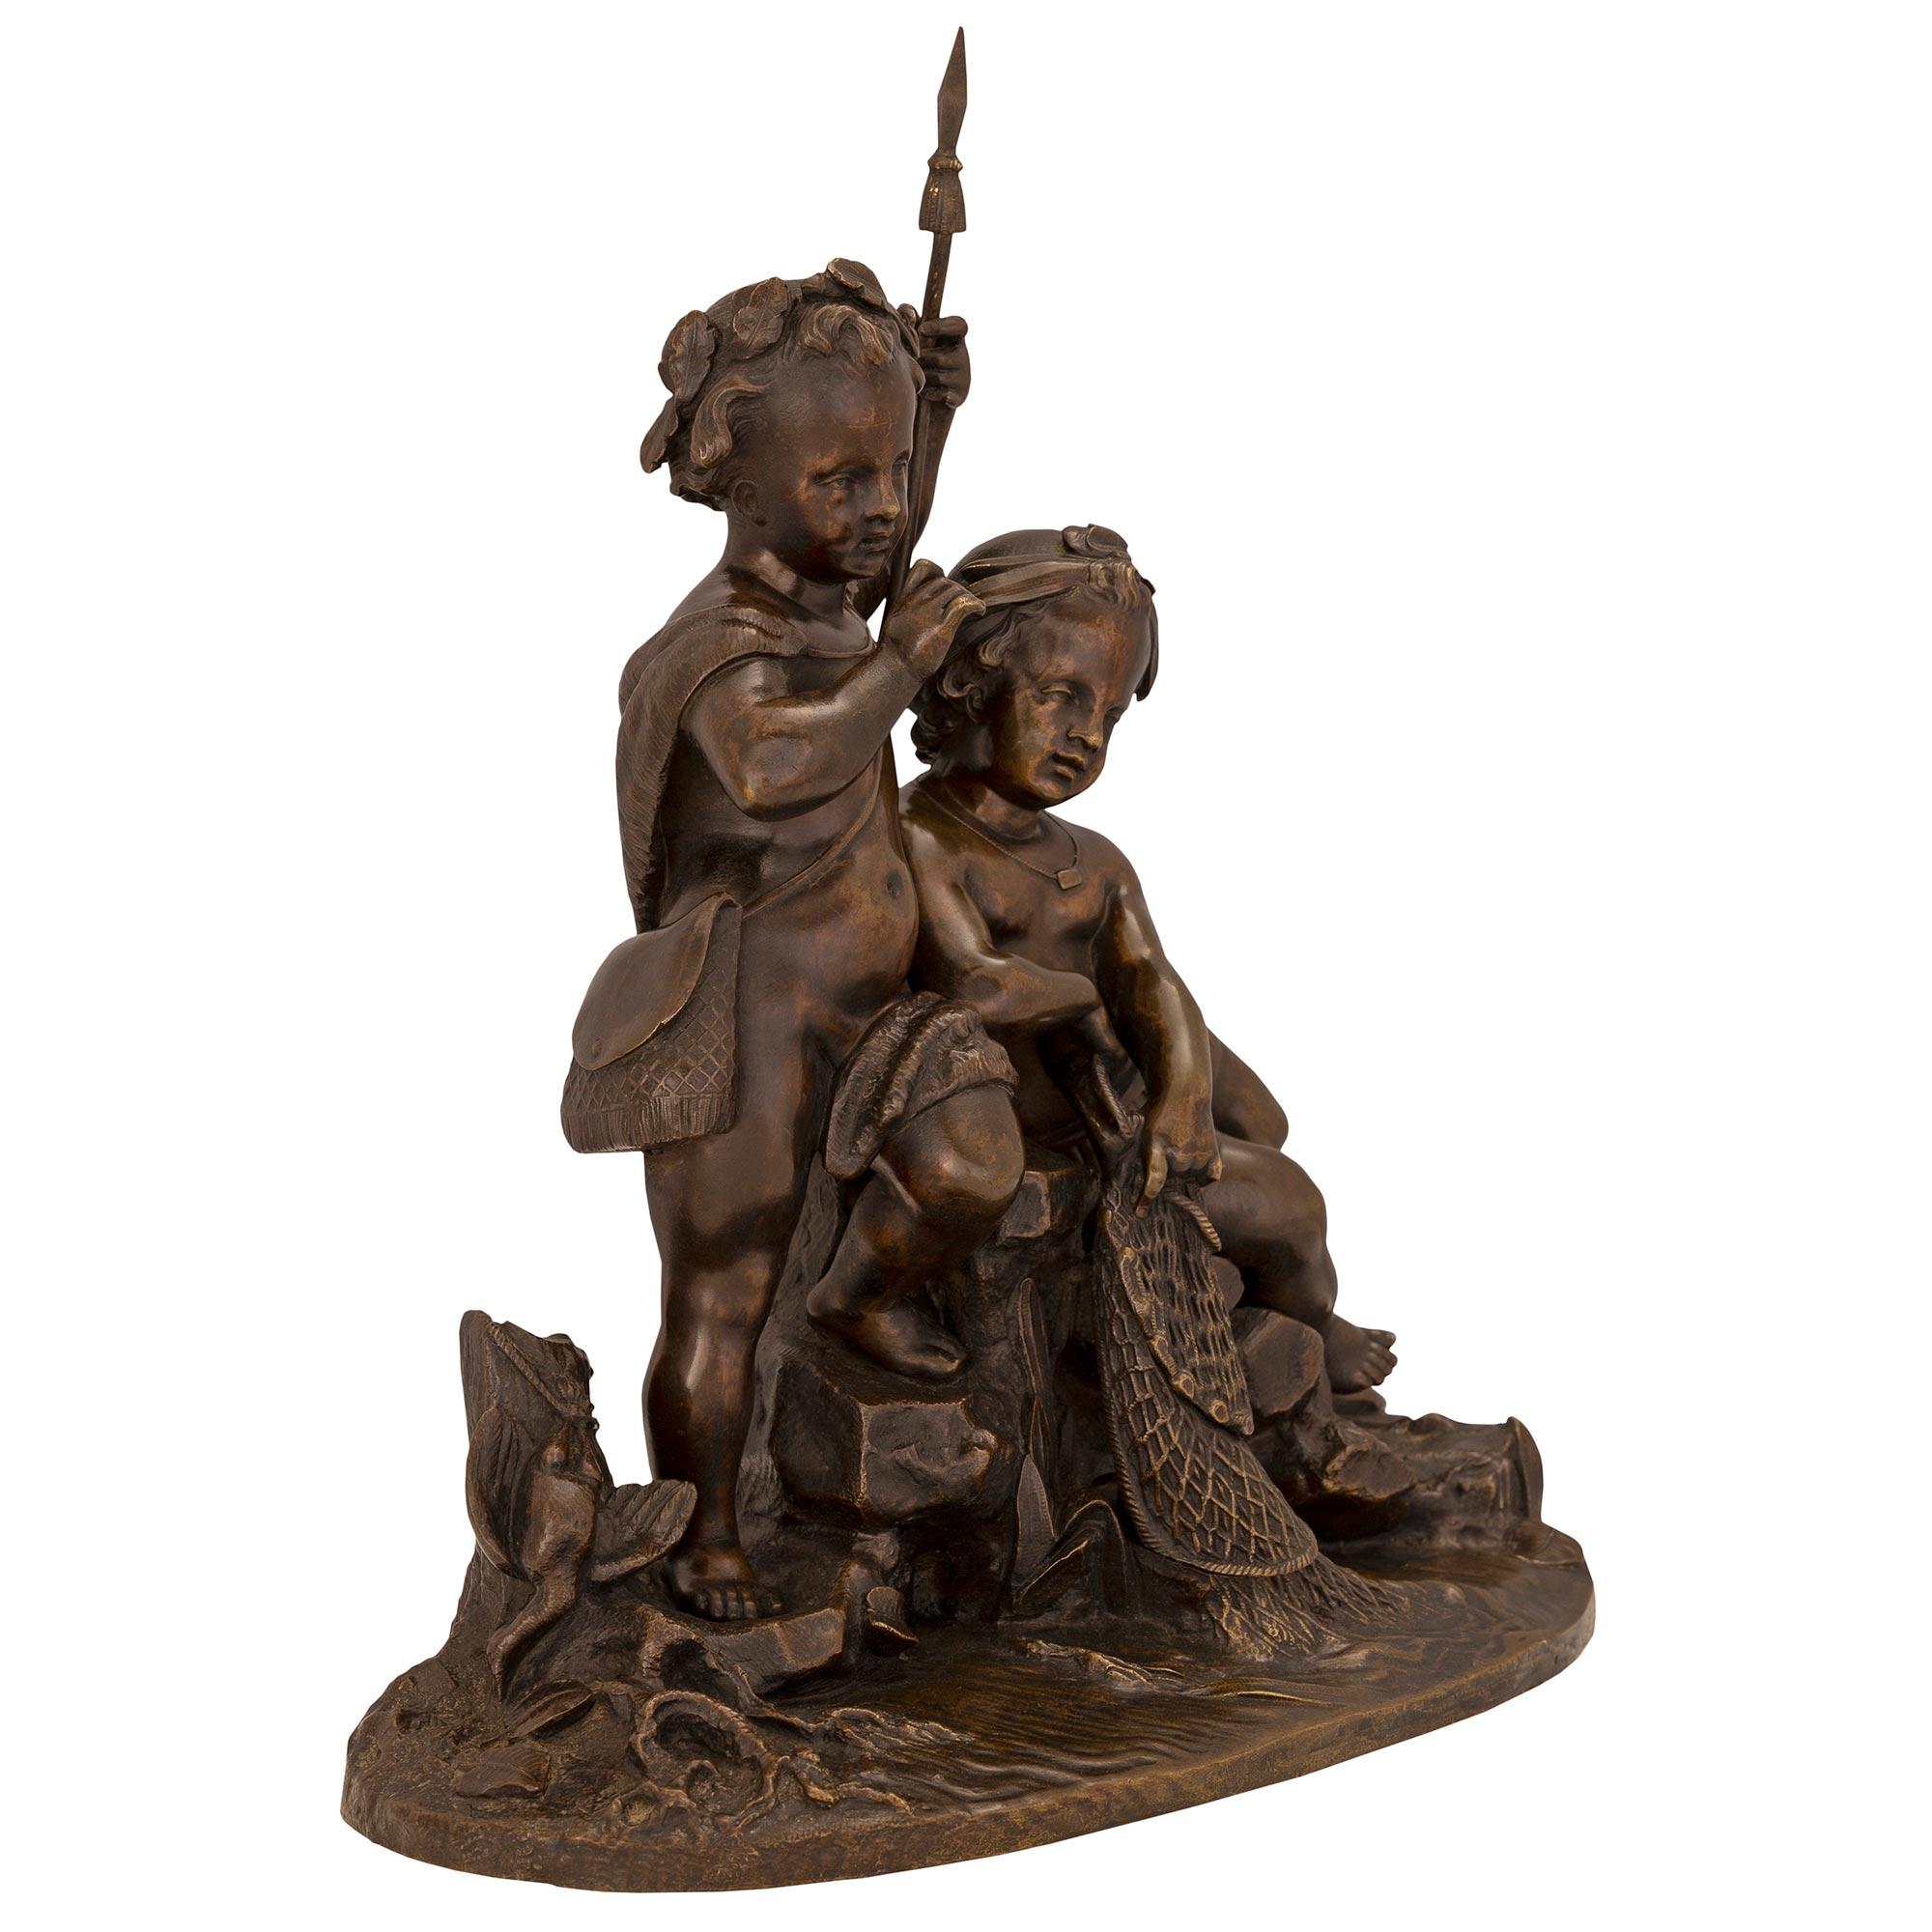 A charming and high quality French 19th century patinated bronze statue of two young boys fishing. The statue is raised by an oblong base with a fine ground like design with water flora growing next to impressive rocks and a tree trunk. One young